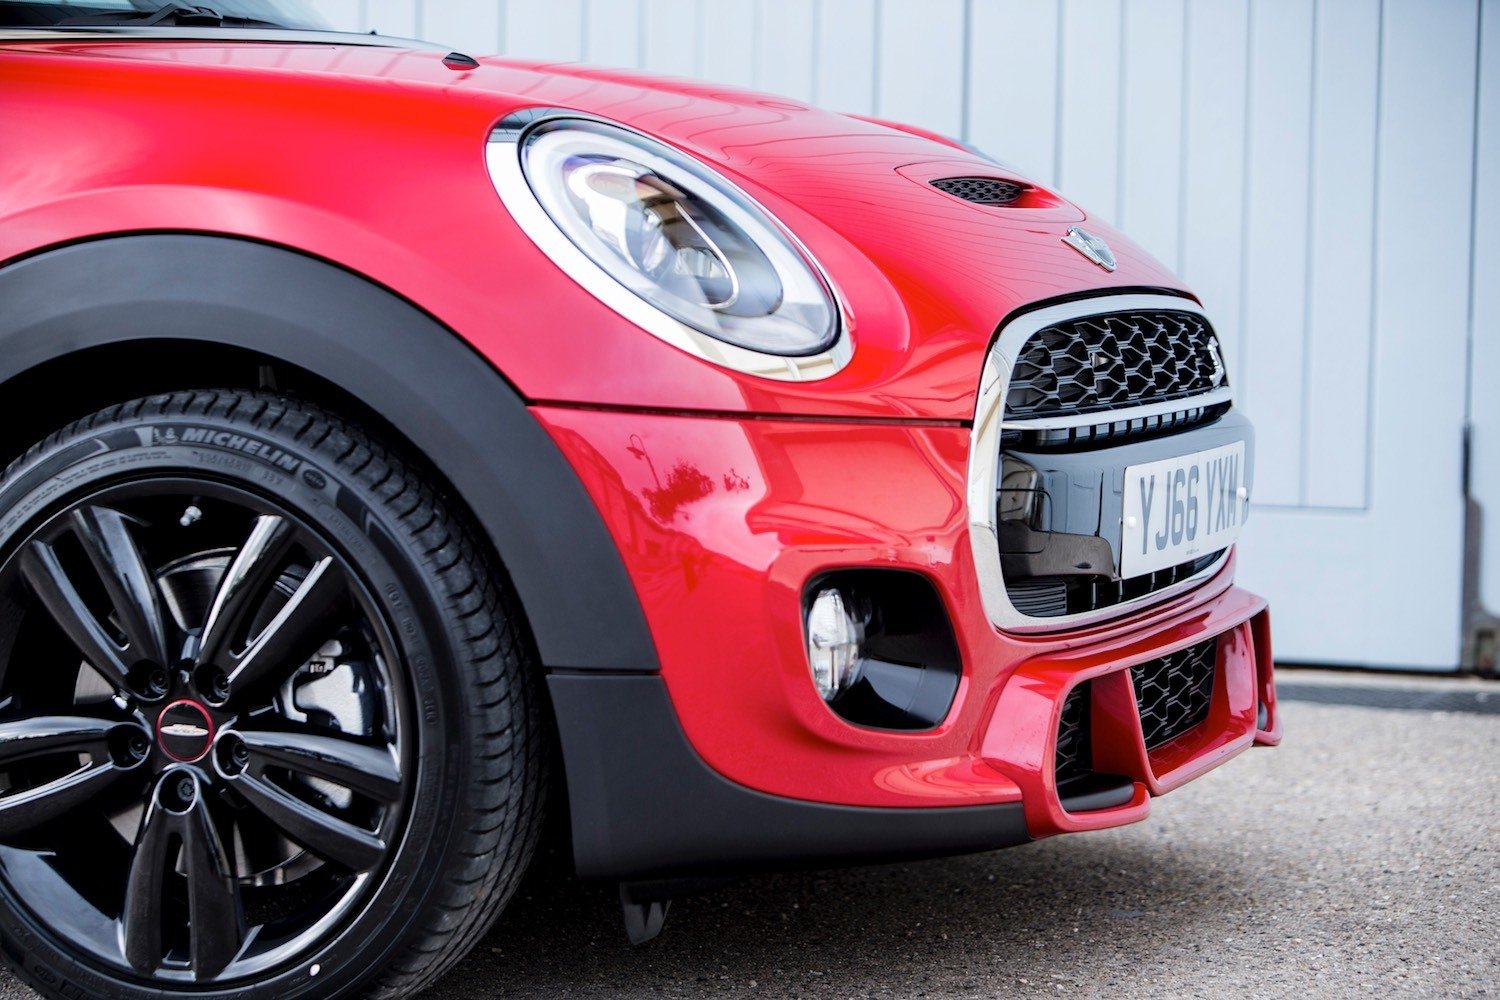 Tom Scanlan reviews the Mini Cooper S Works 210 for Drive 26